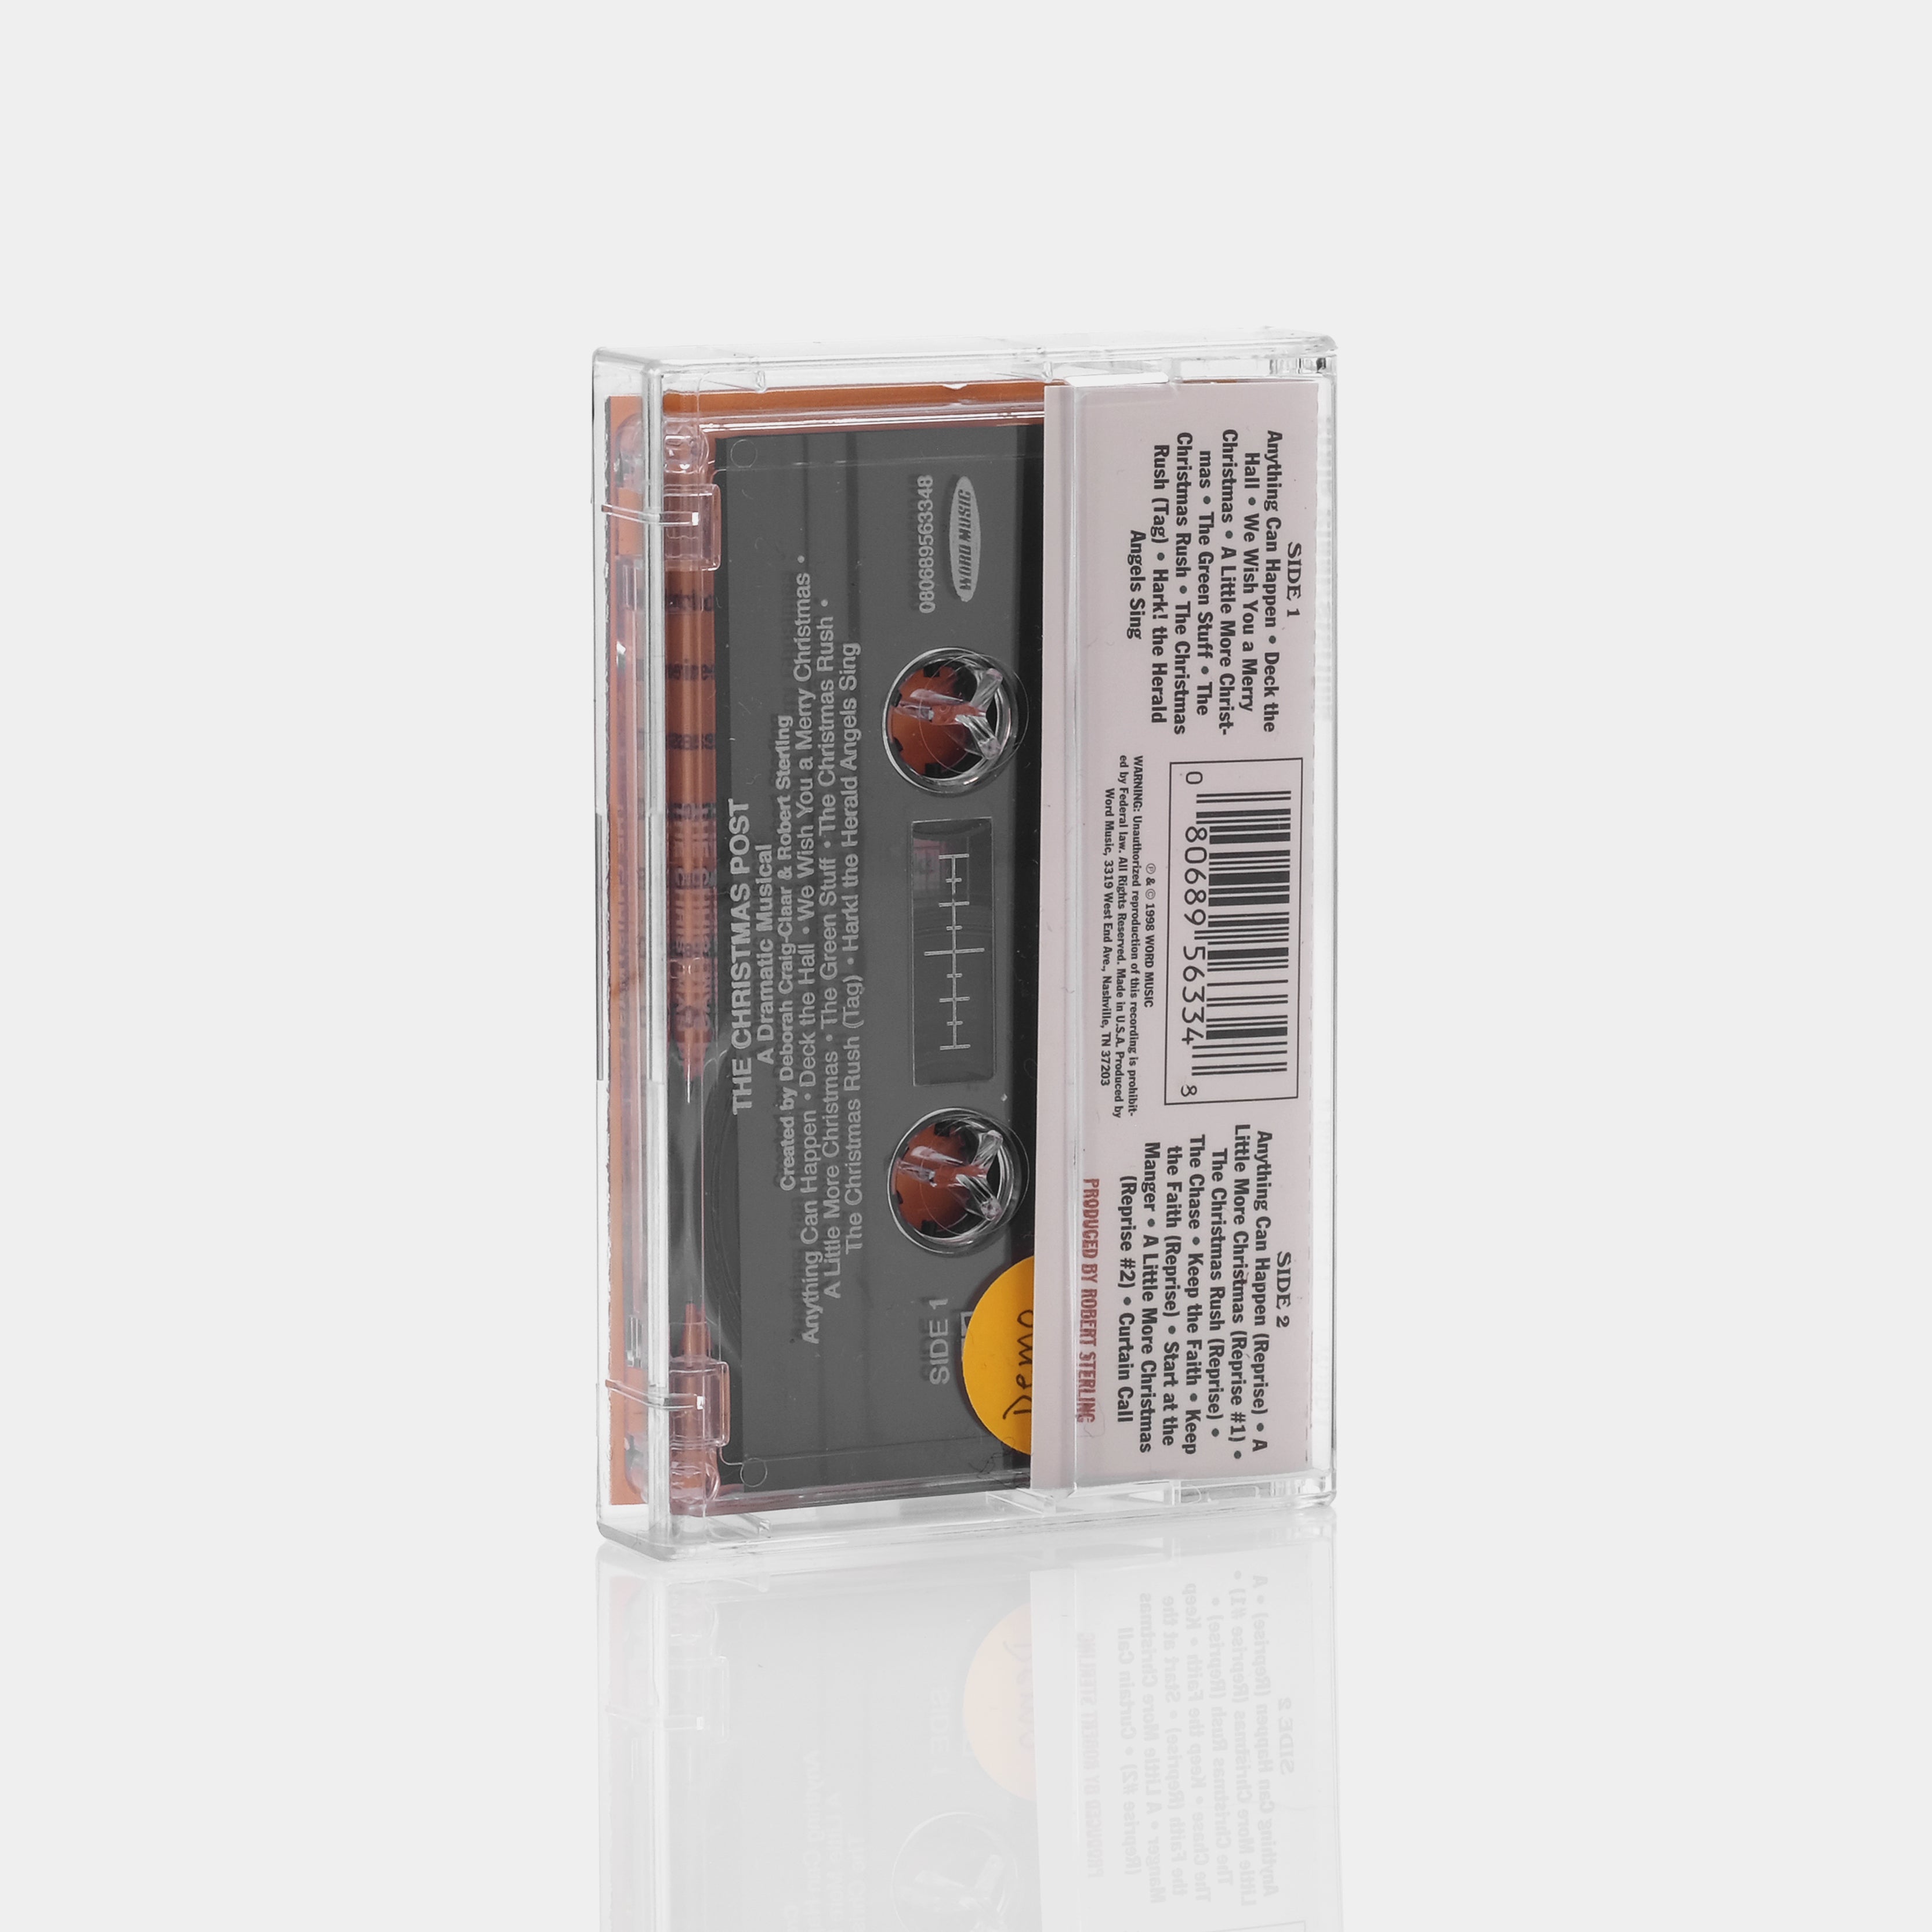 The Christmas Post: A Dramatic Musical Cassette Tape